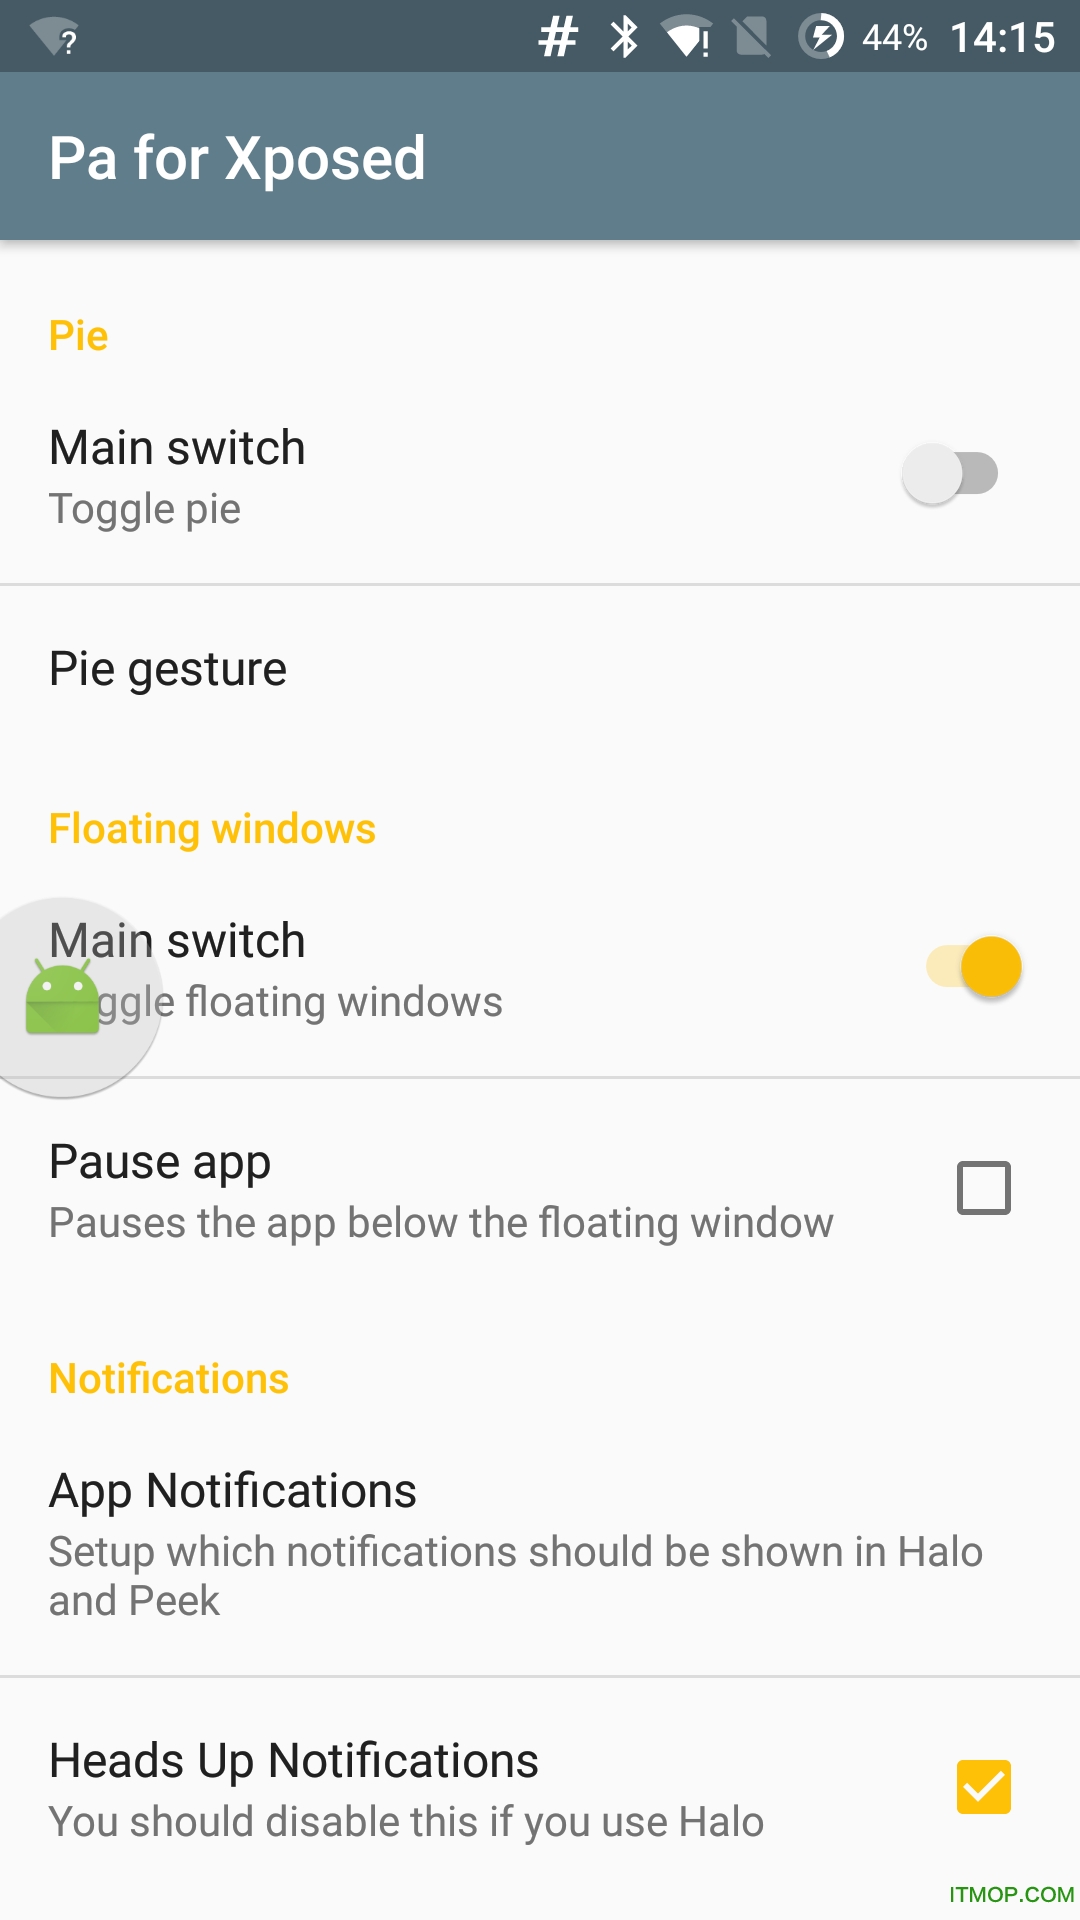 Pa for Xposed(Unique Controls Android) v0.317 ׿2